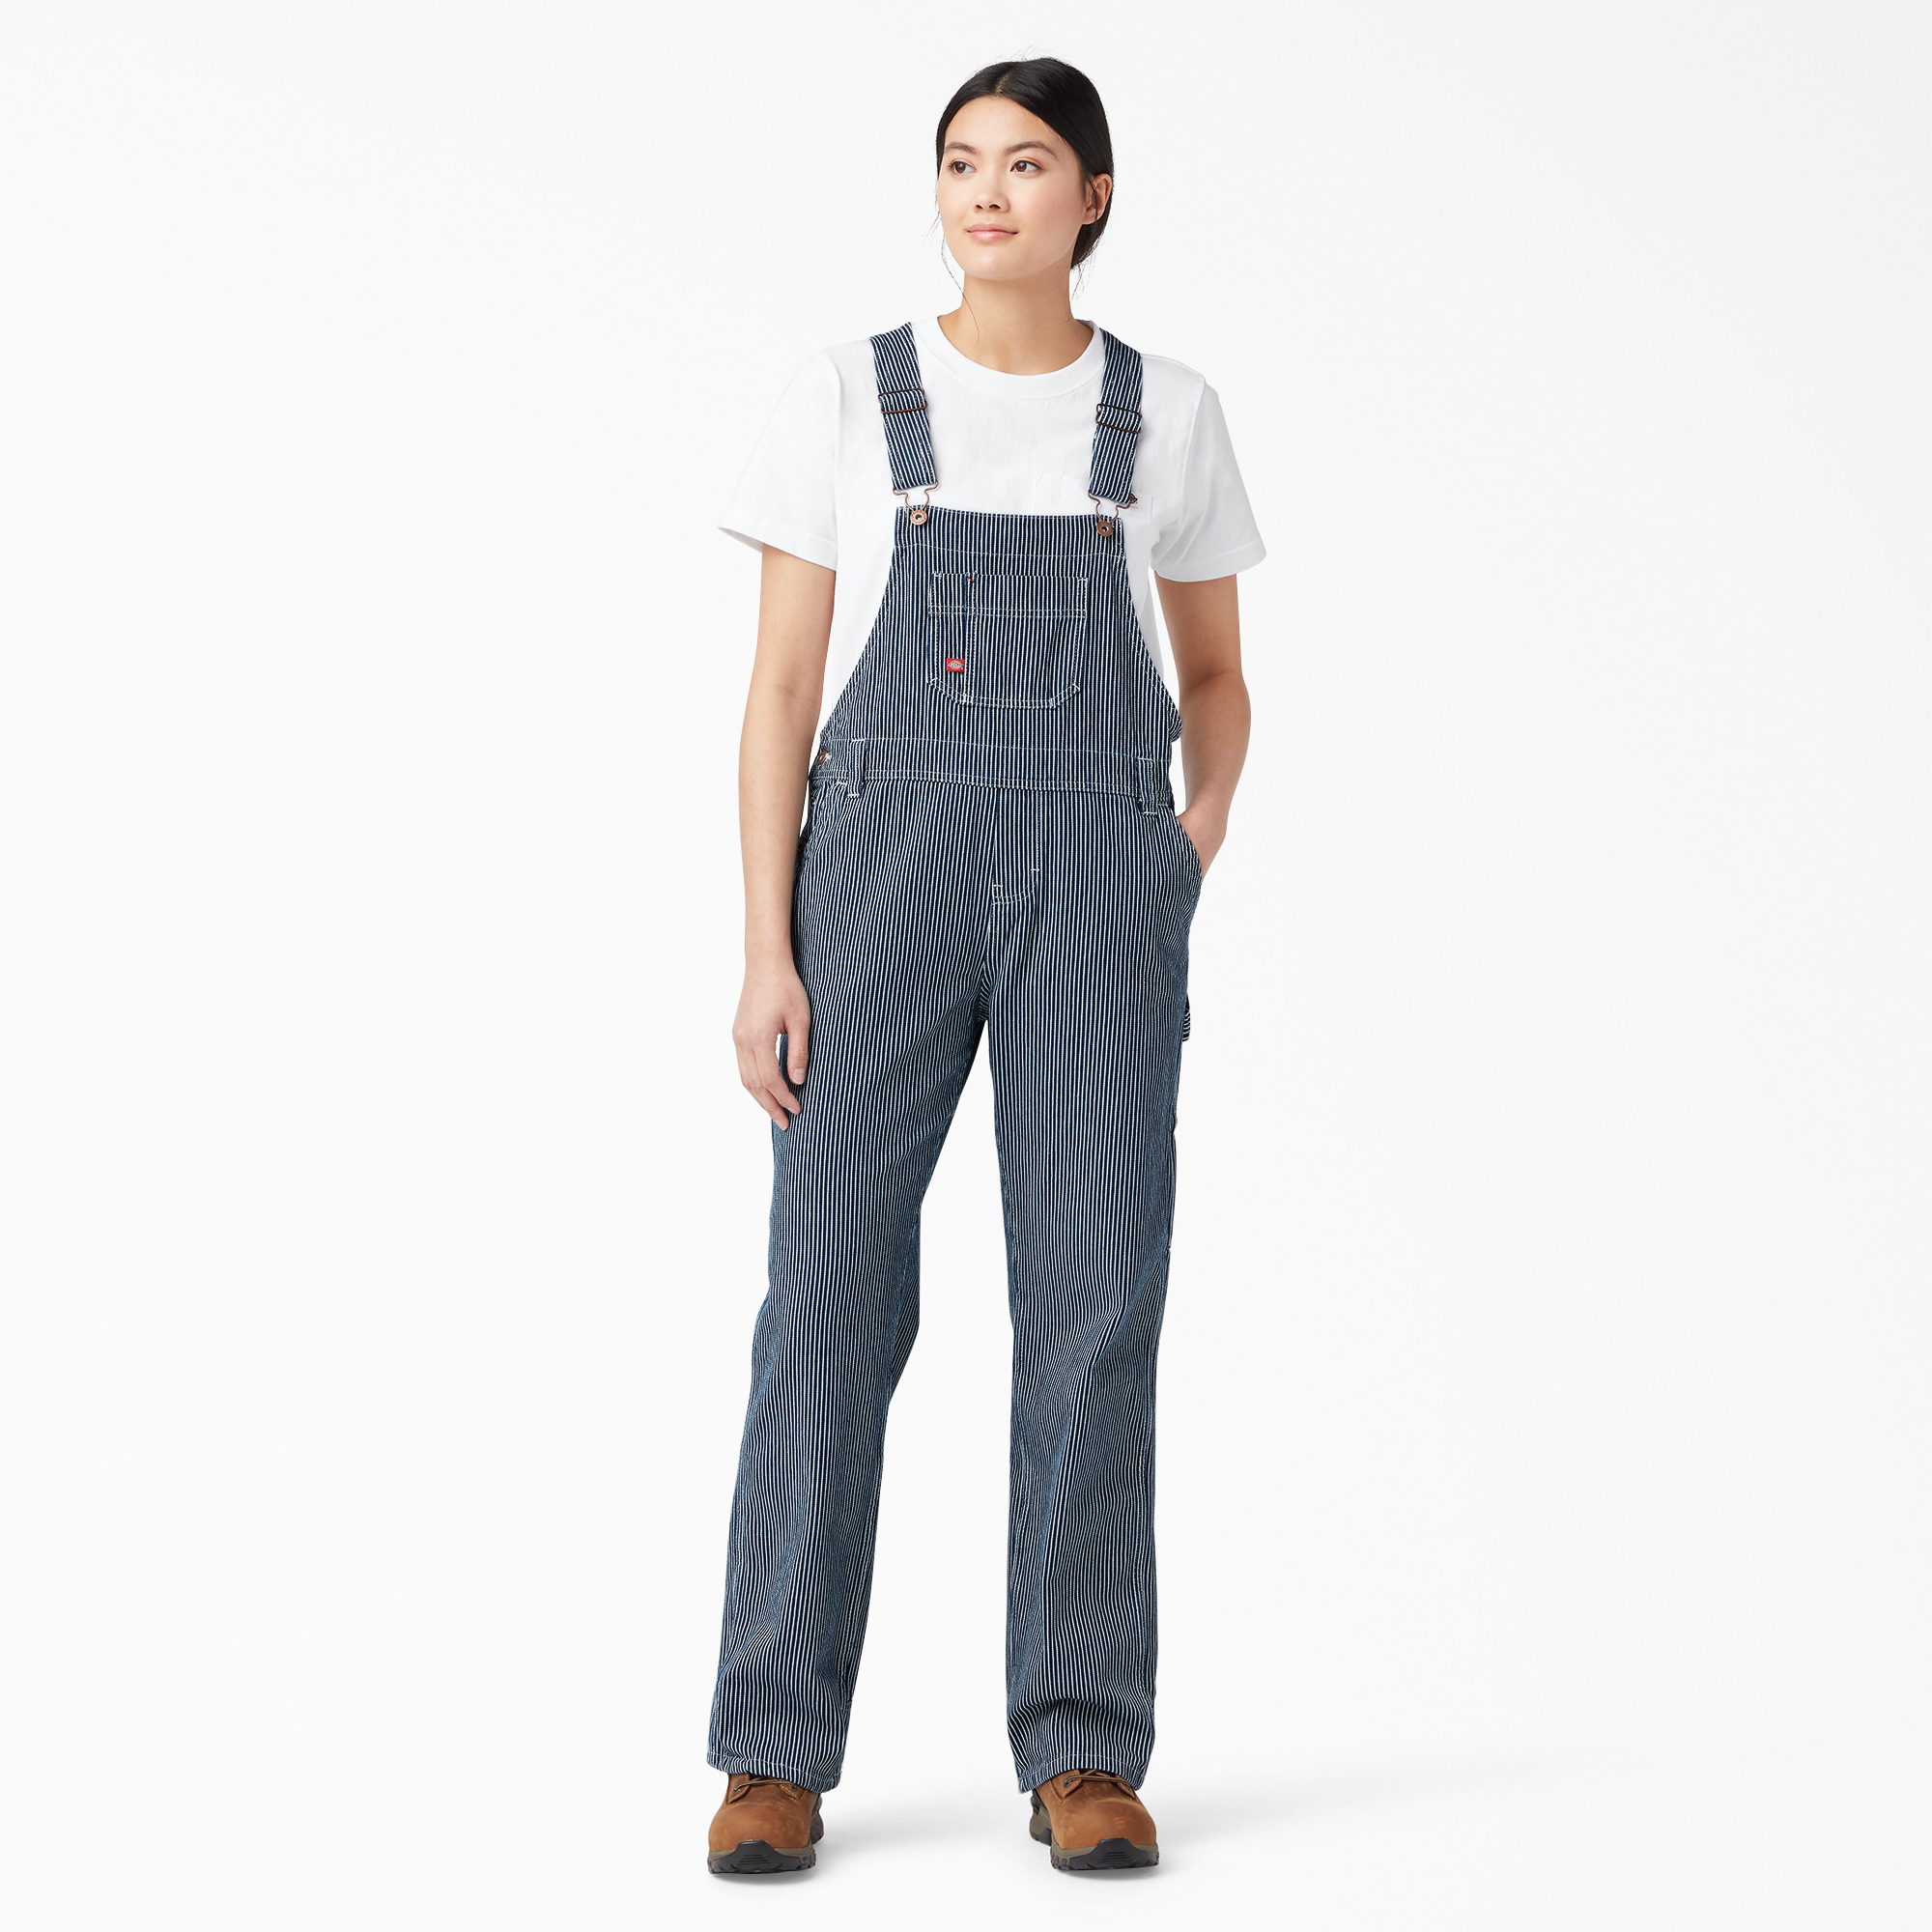 Women's Relaxed Fit Bib Overalls - Blue White Hickory Stripe (RHS)